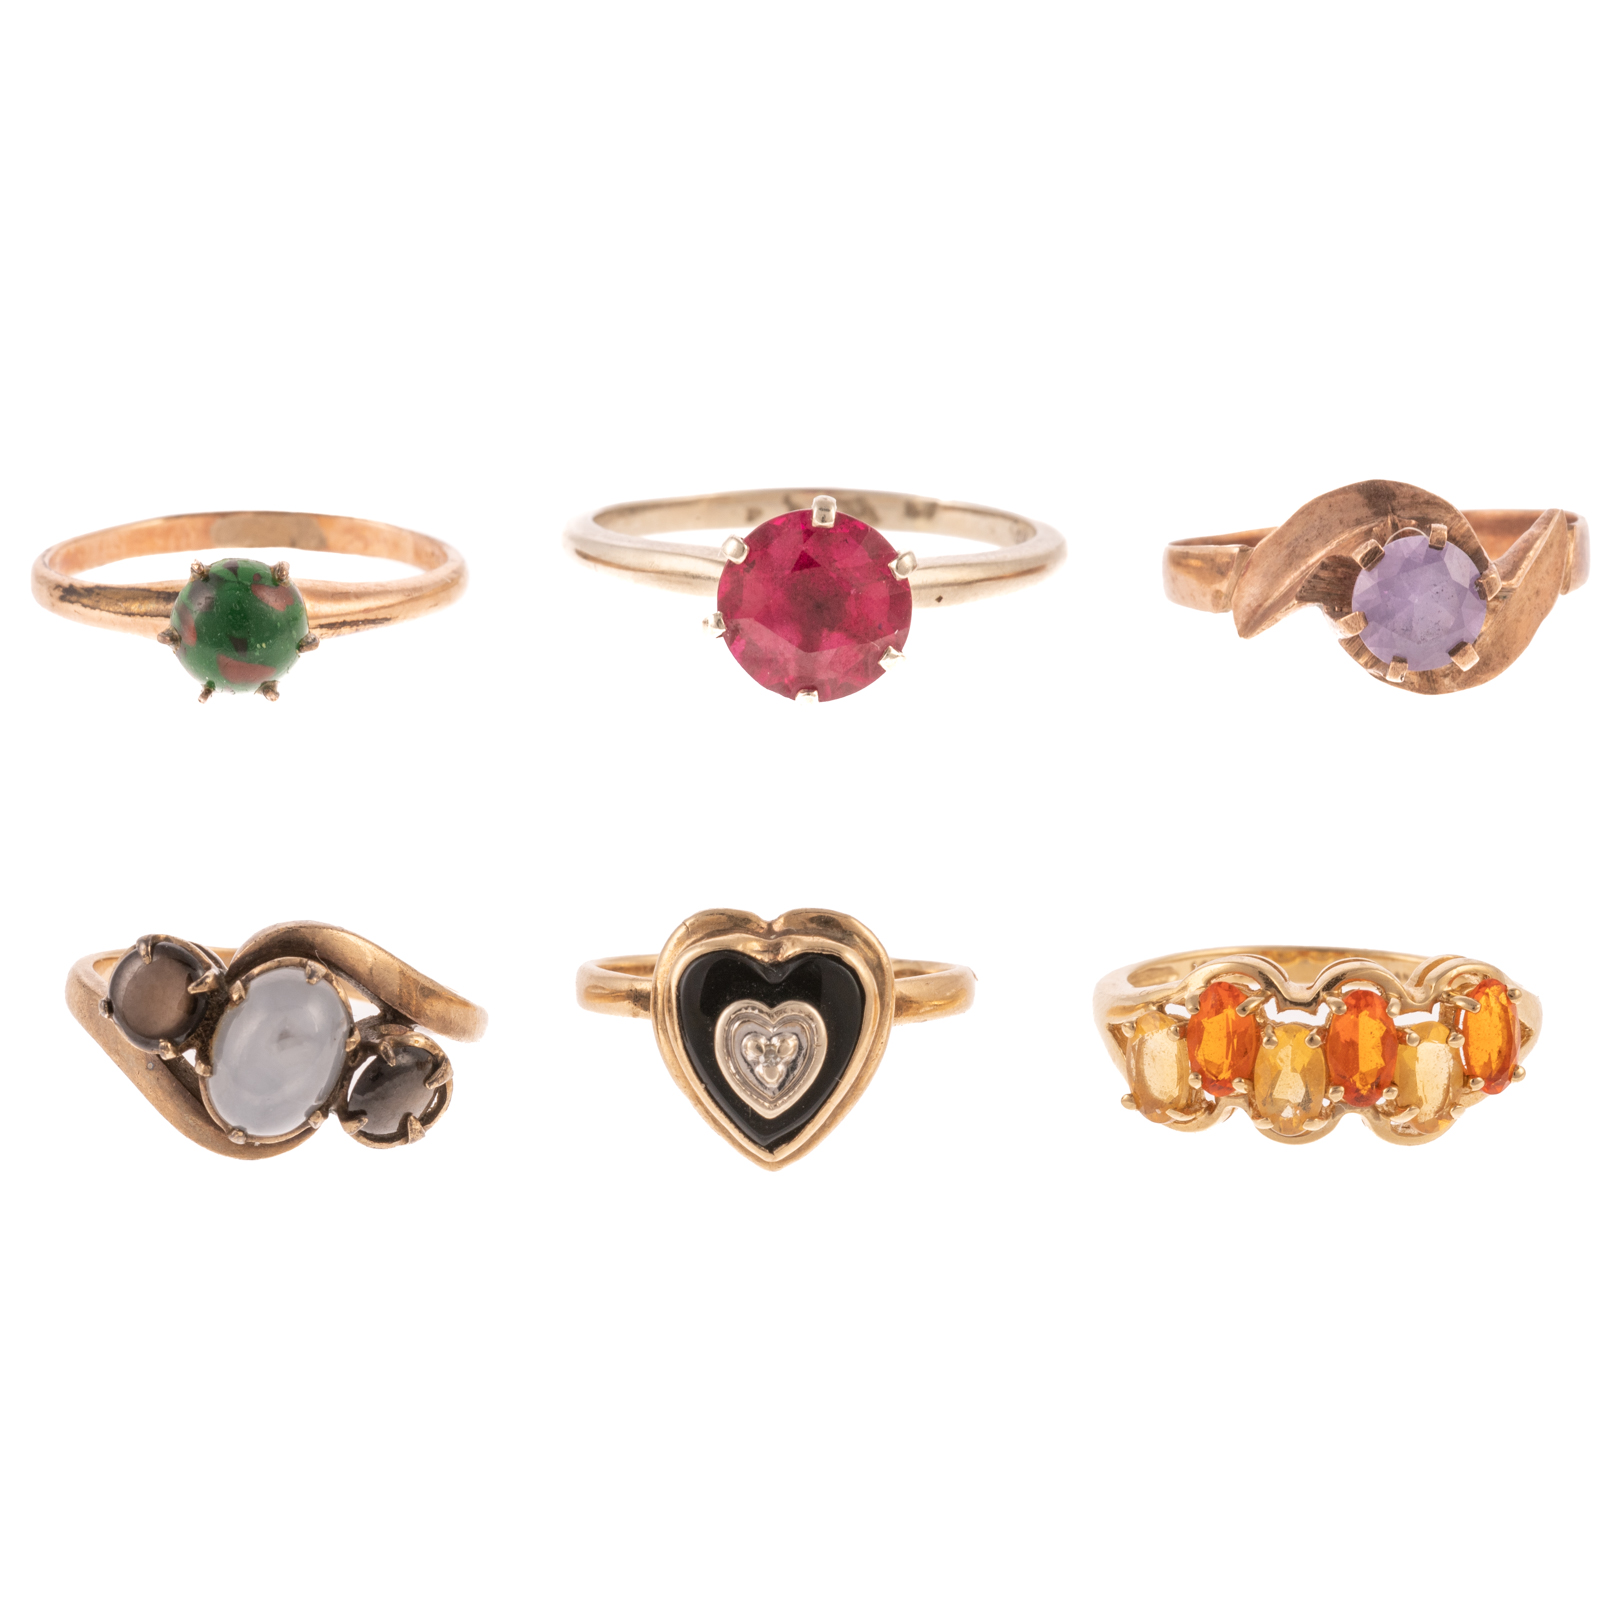 A COLLECTION OF SIX 14K GEMSTONE 2e9f65